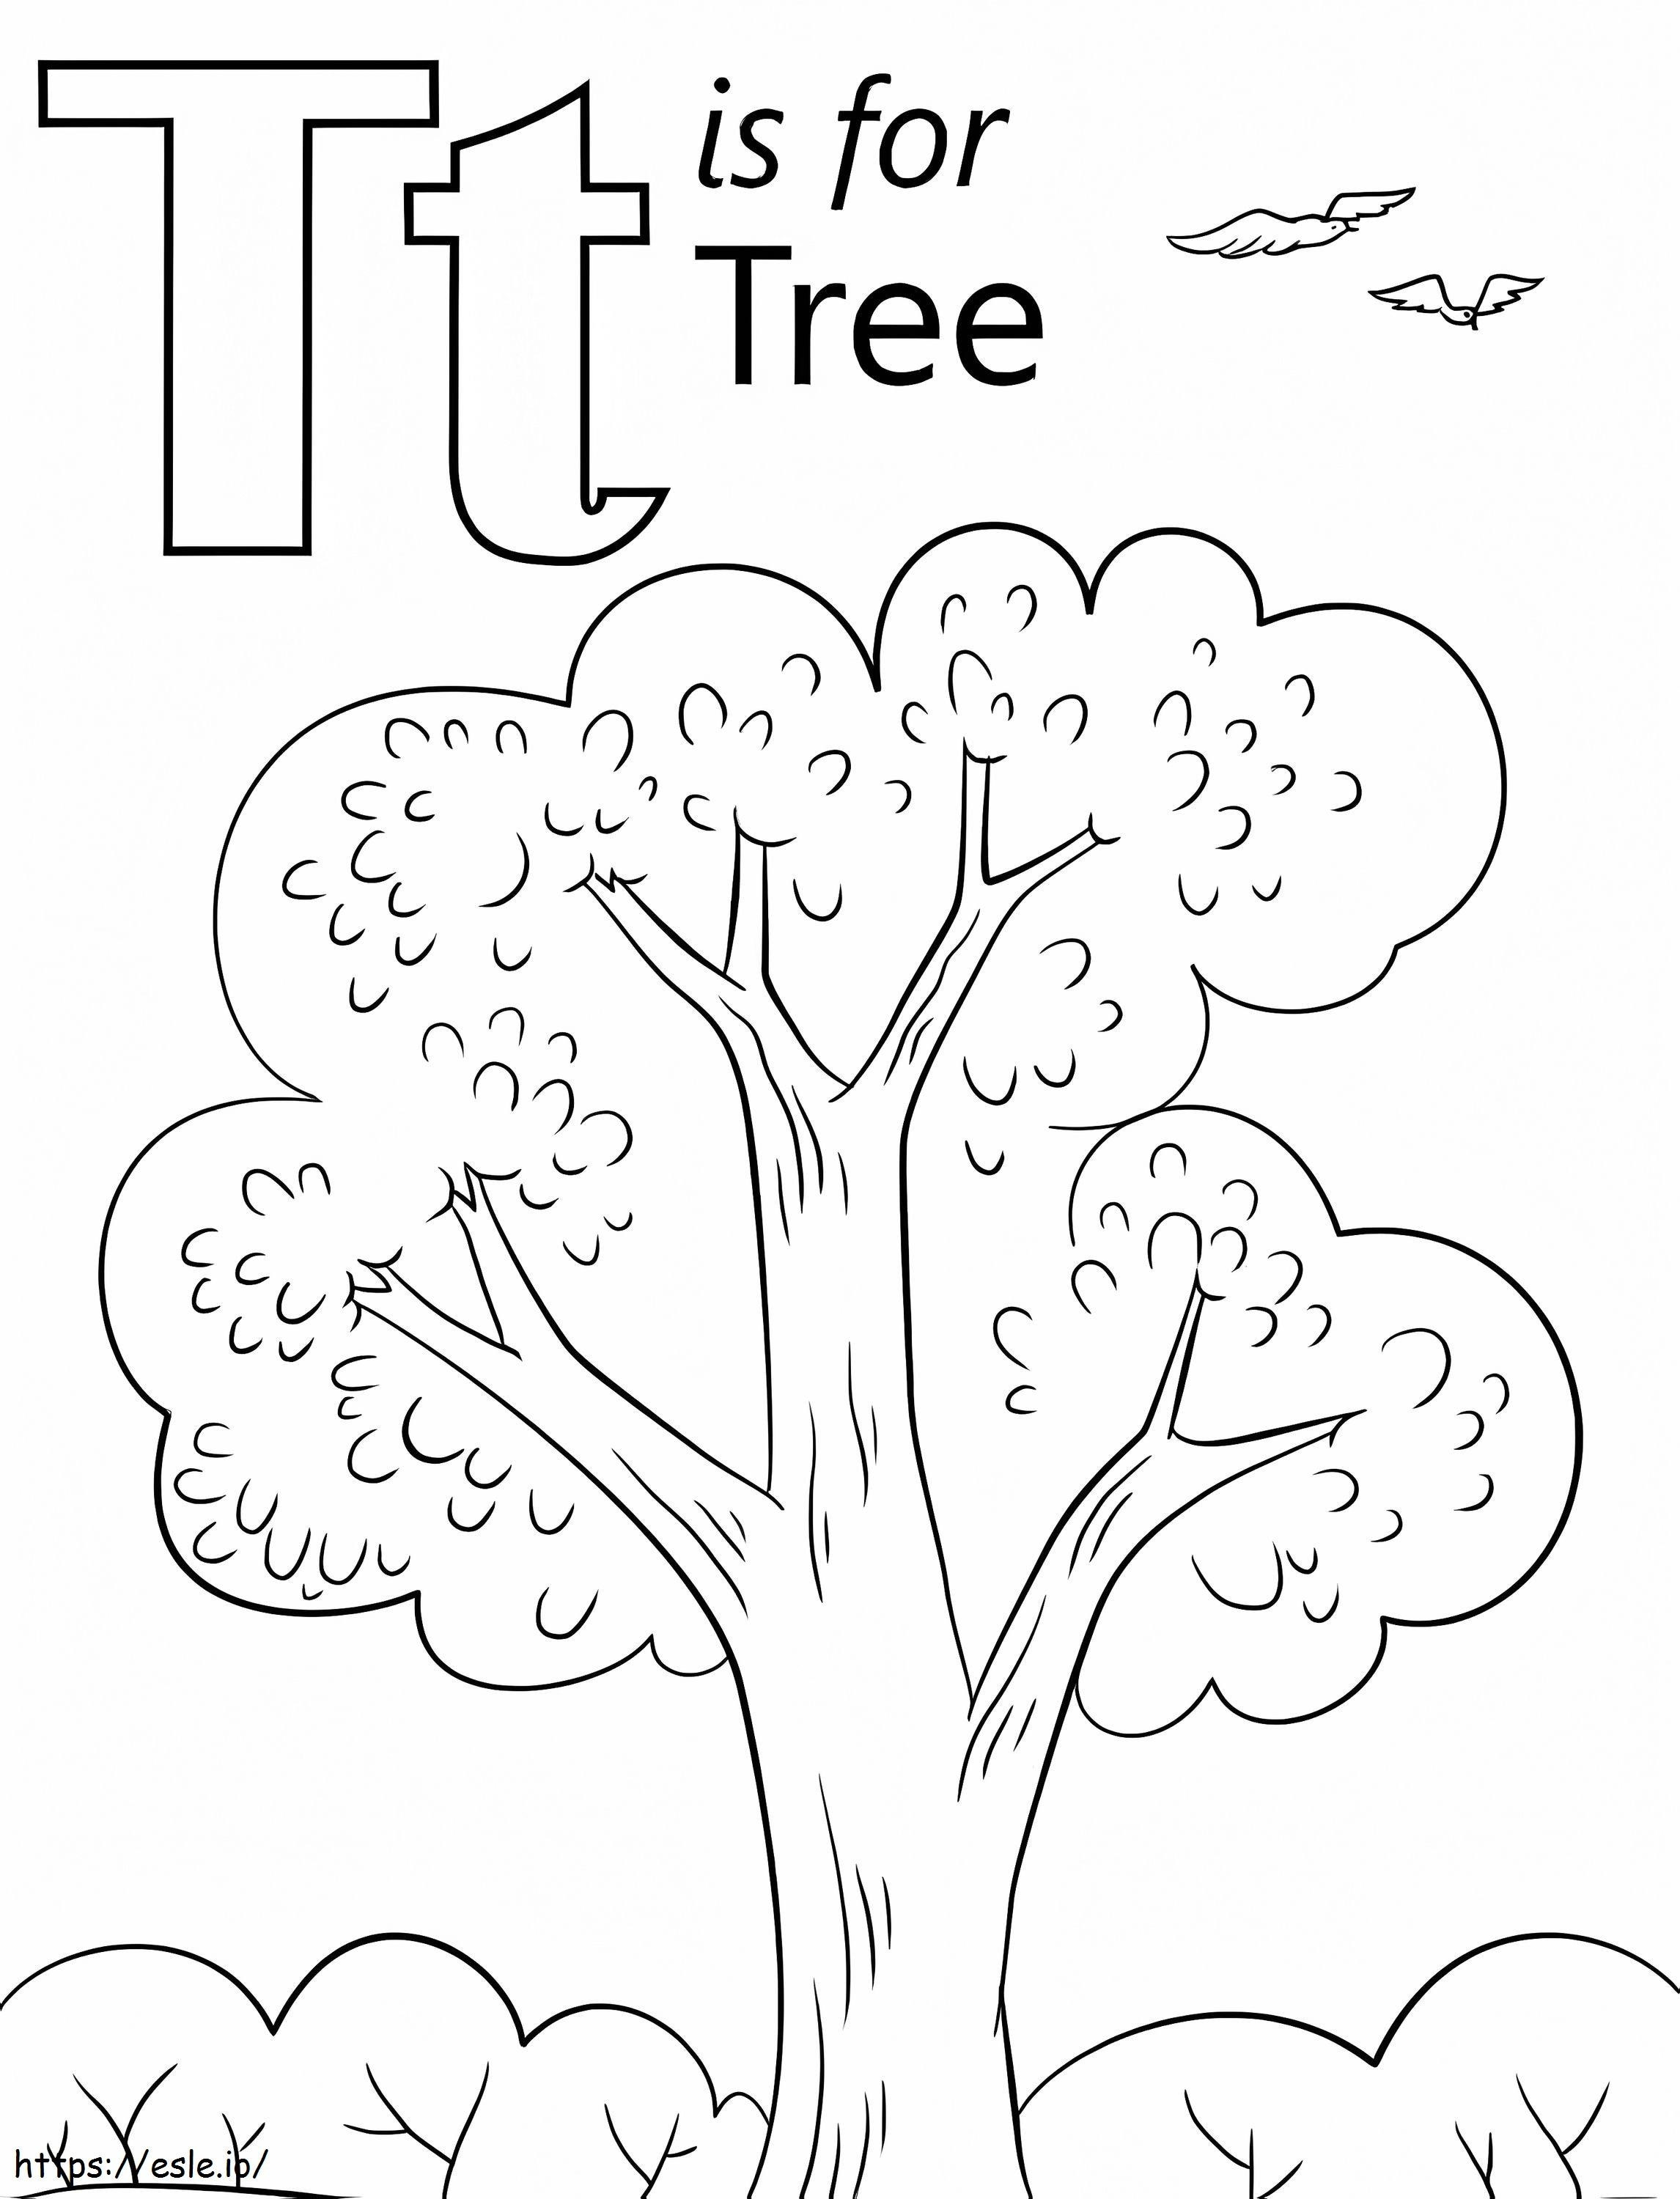 Tree Letter T And Cloud coloring page